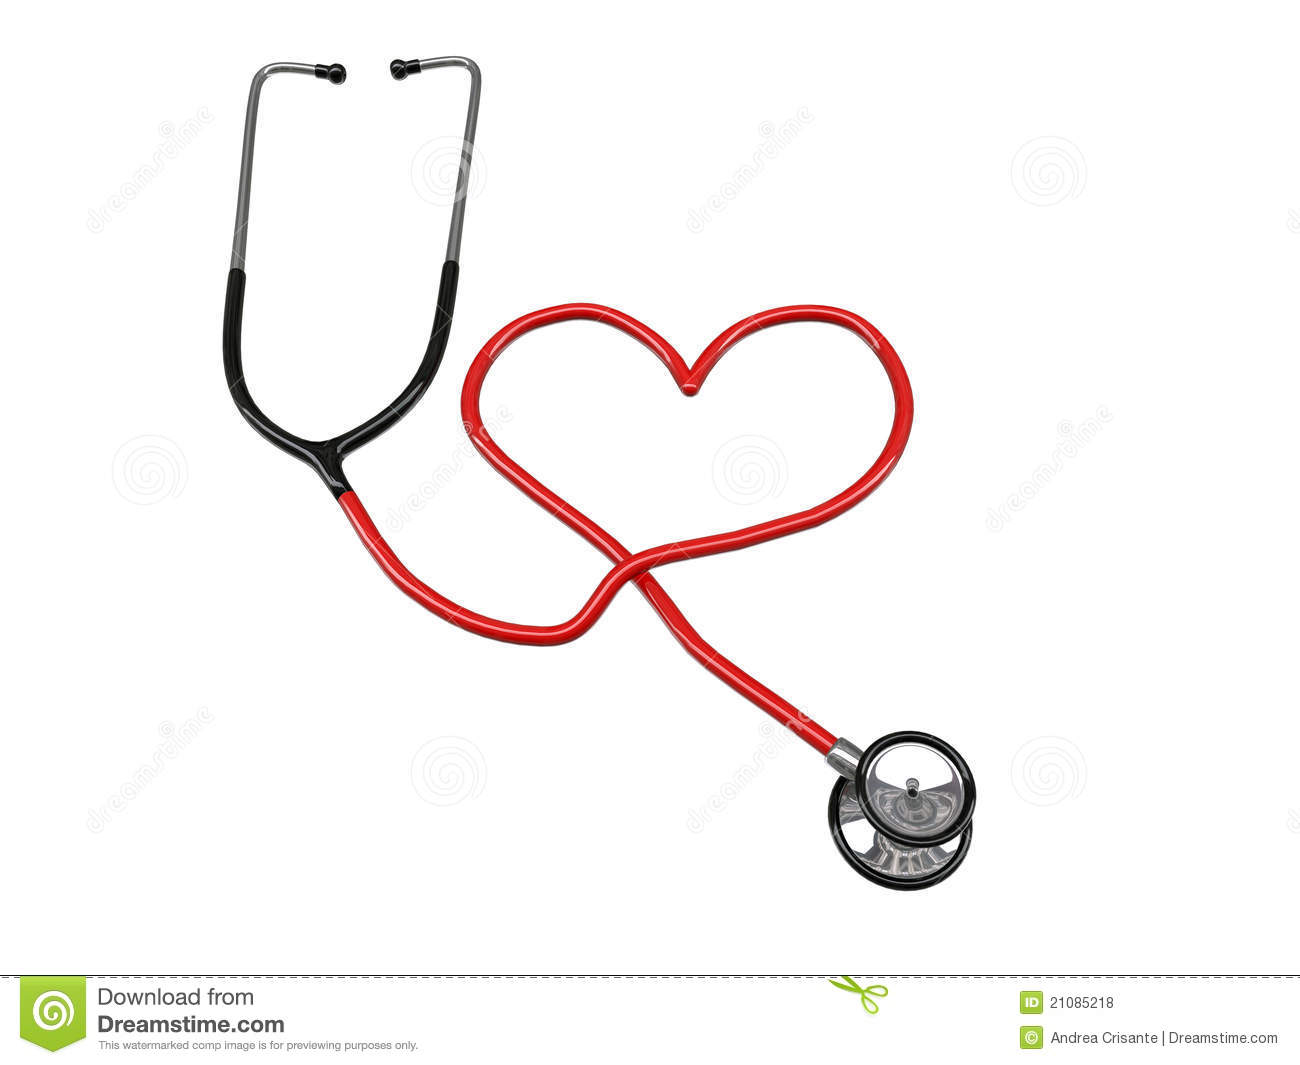 Stethoscope Heart Silhouette Royalty Free Stock Photos   Image    